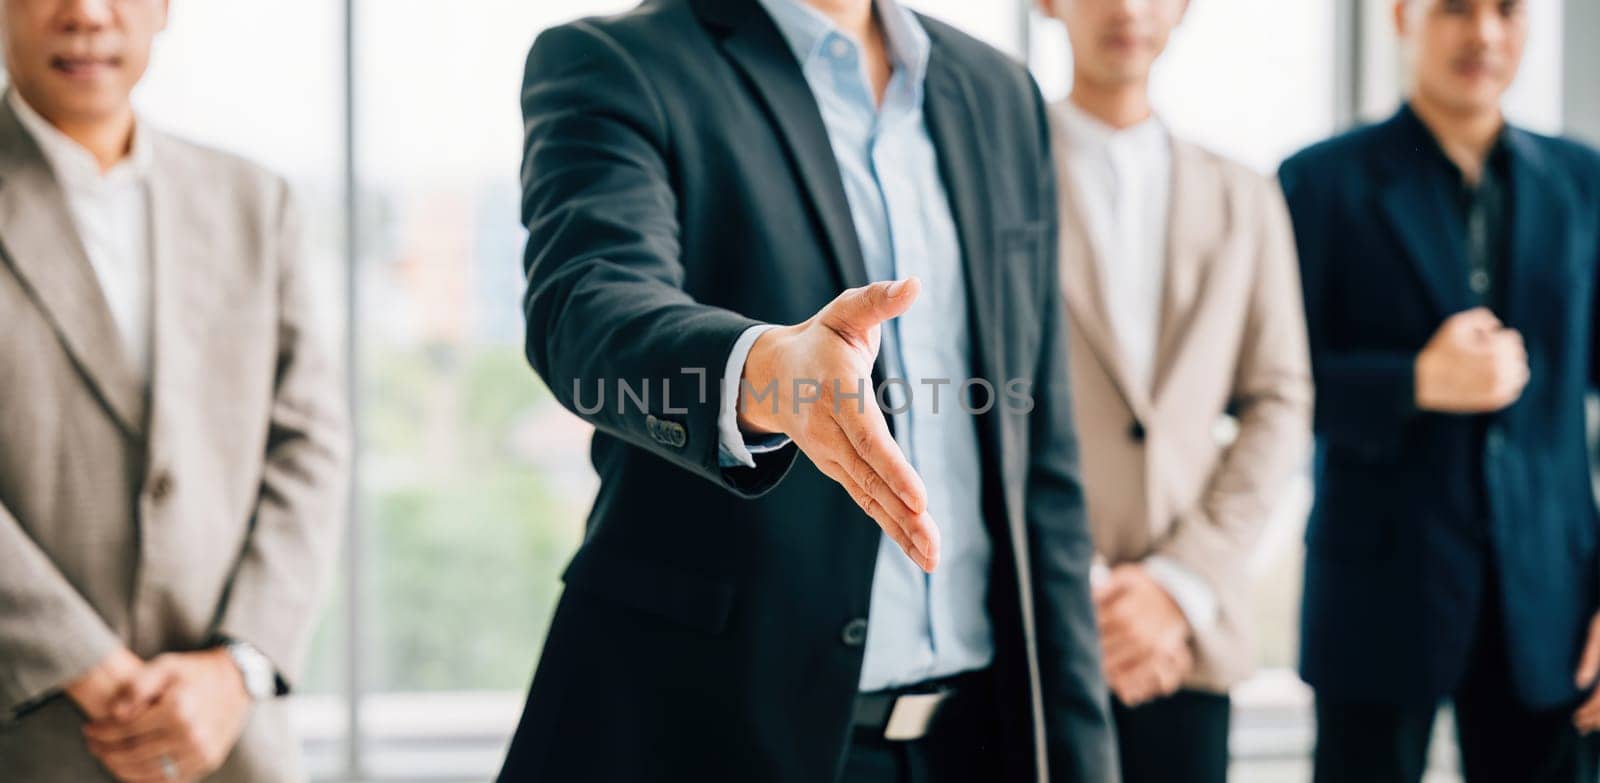 Businessman in suit extends his open palm in gesture of request and handshake, symbolizing trust successful cooperation and teamwork in office setting. It represents professionalism and confidence. by Sorapop